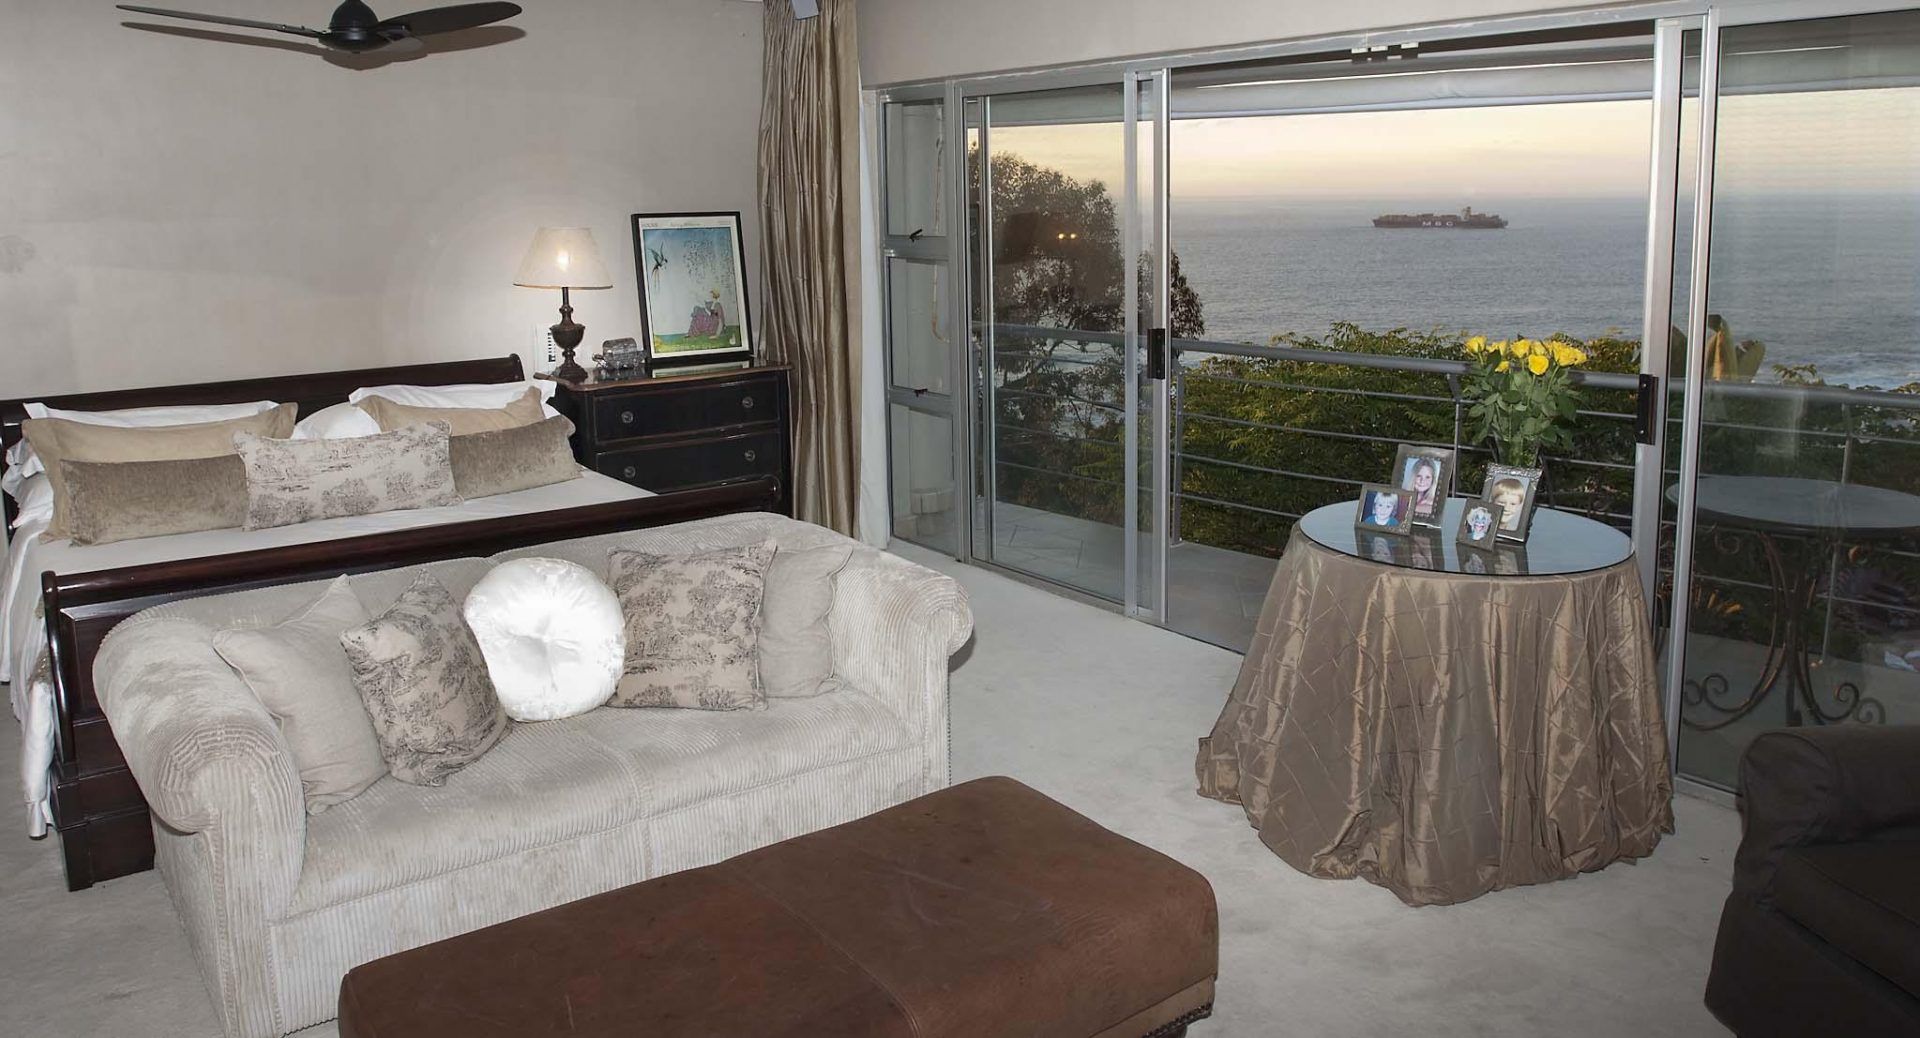 Photo 15 of Villa Marina accommodation in Bantry Bay, Cape Town with 4 bedrooms and 4 bathrooms